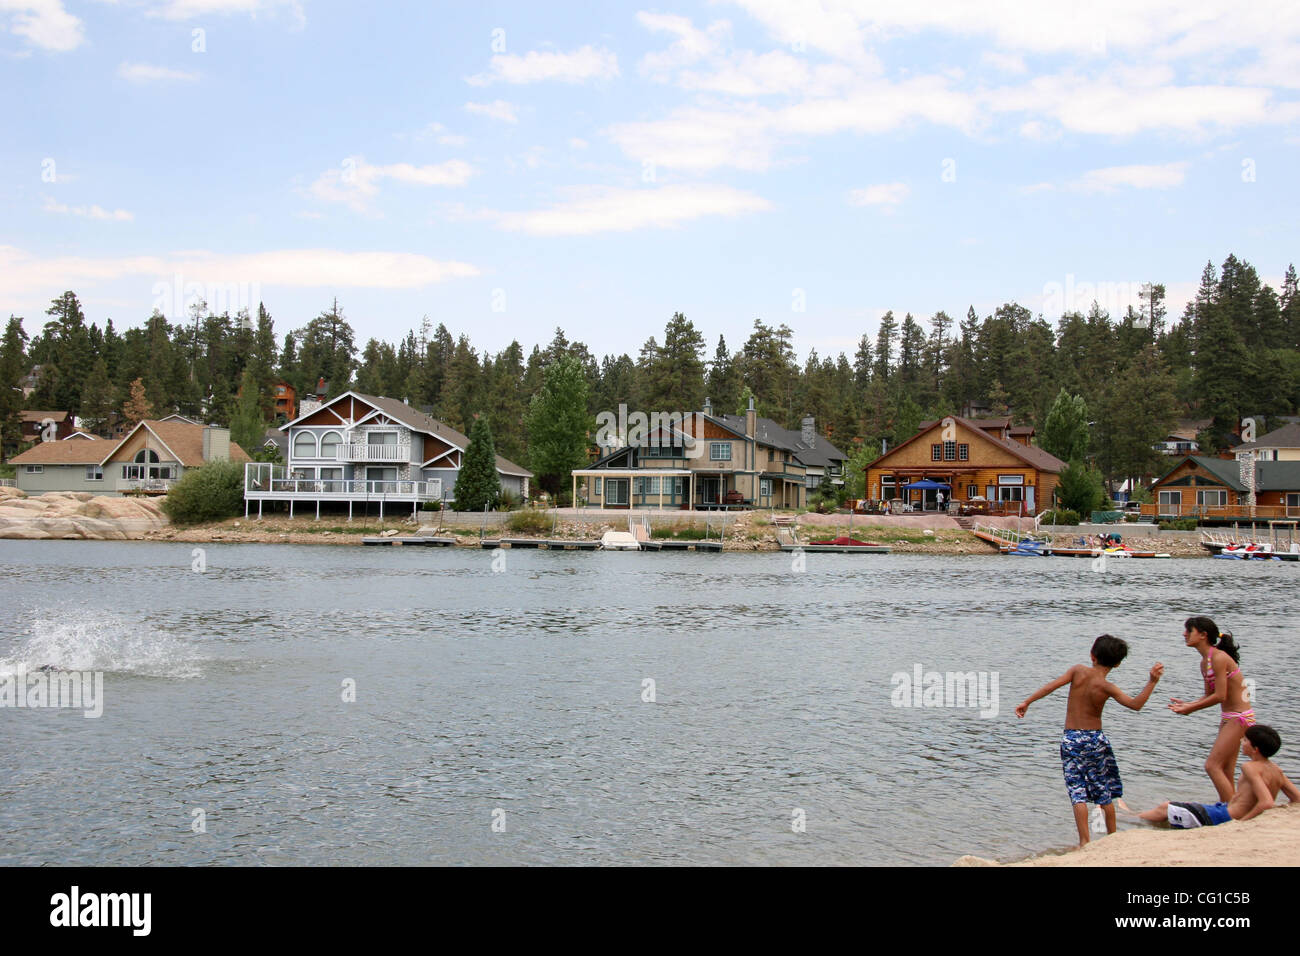 Aug 05, 2007 - Big Bear, CA, USA - Big Bear Lake is located in San Bernardino county and it provides an attractive setting for many outdoor activities, including fishing, boating and water skiing.  Pictured:  Children skip rocks and pebbles across the lake, in the background are some of the lake fro Stock Photo